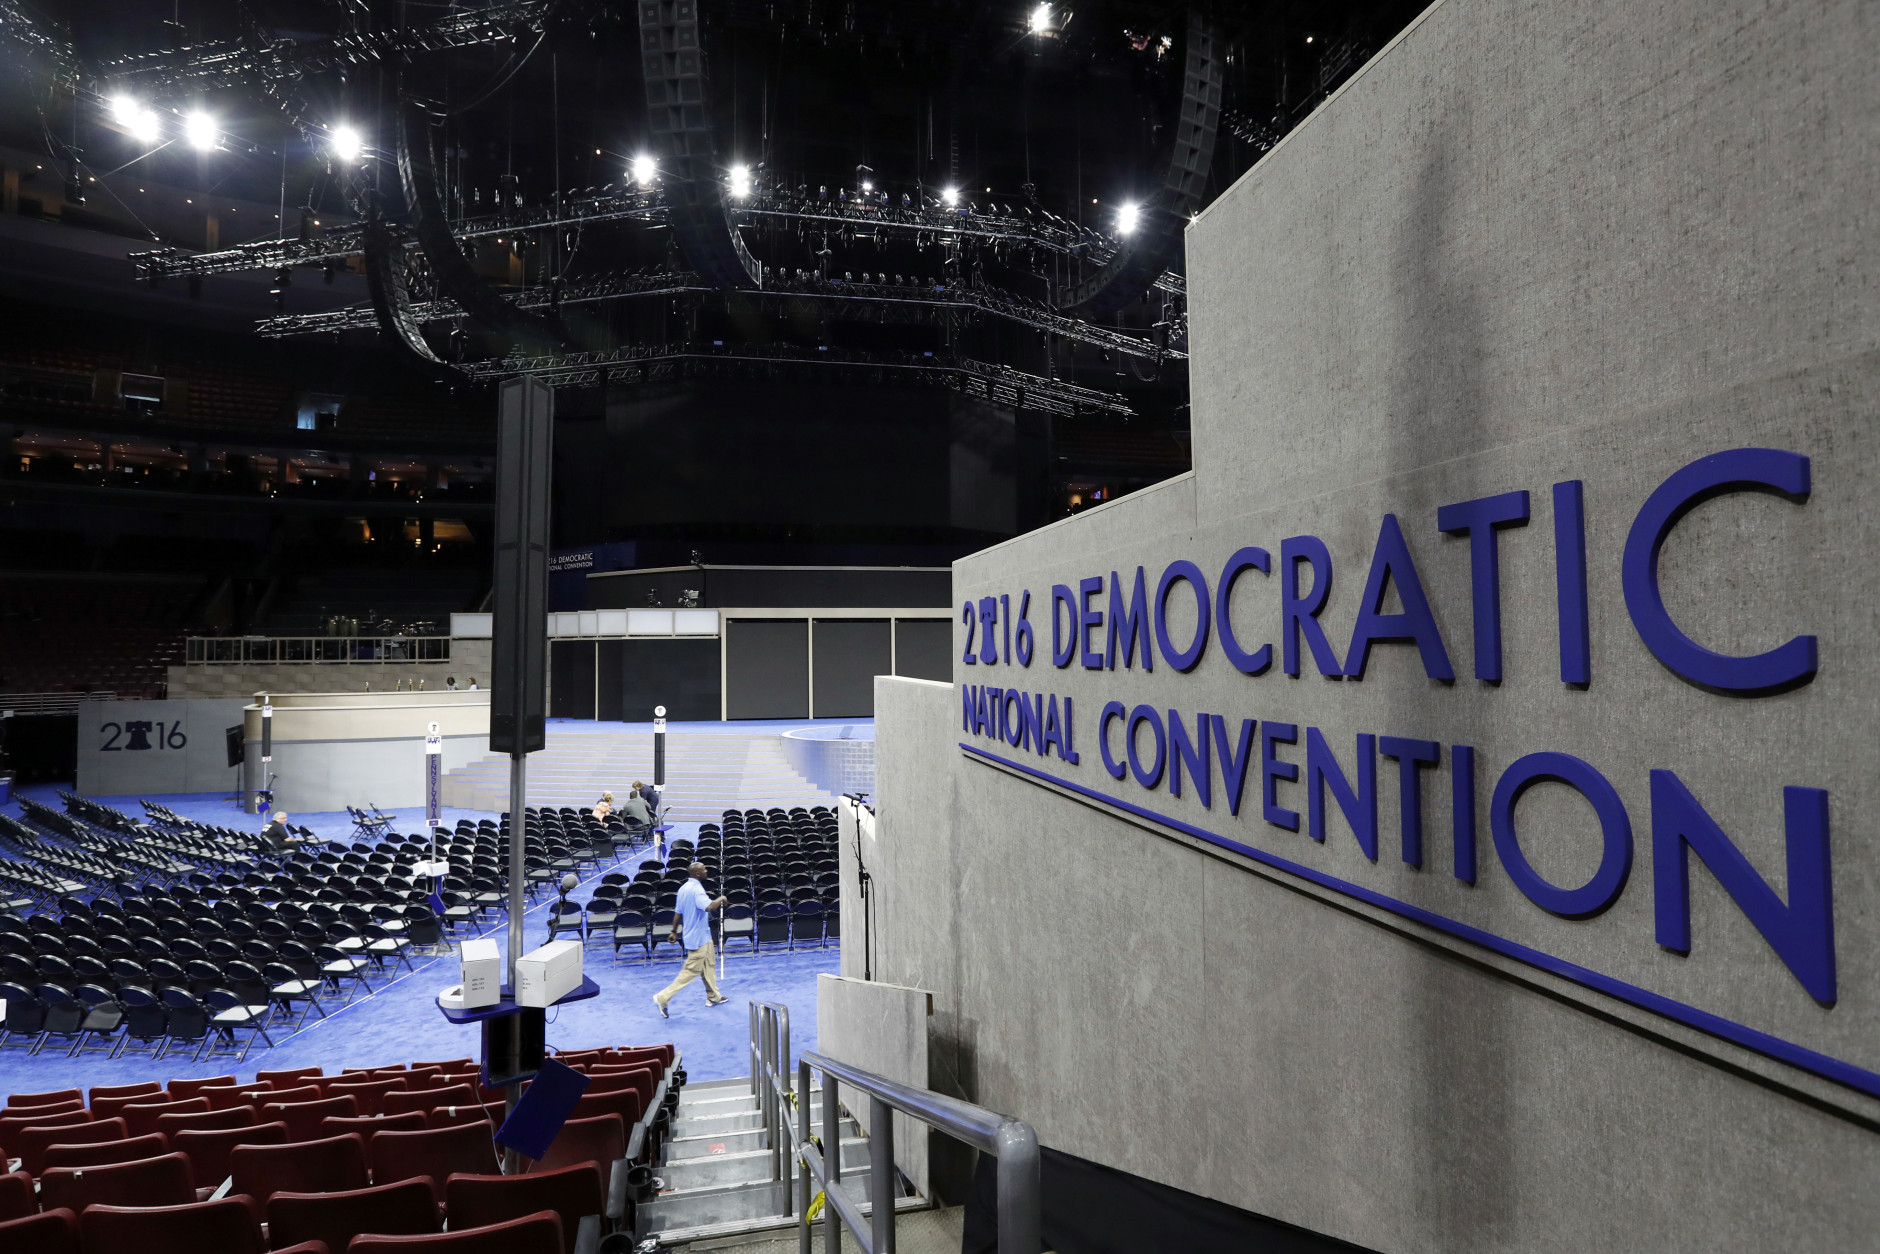 Work continues inside the convention hall before the Democratic National Convention, Saturday, July 23, 2016, in Philadelphia. (AP Photo/Alex Brandon)